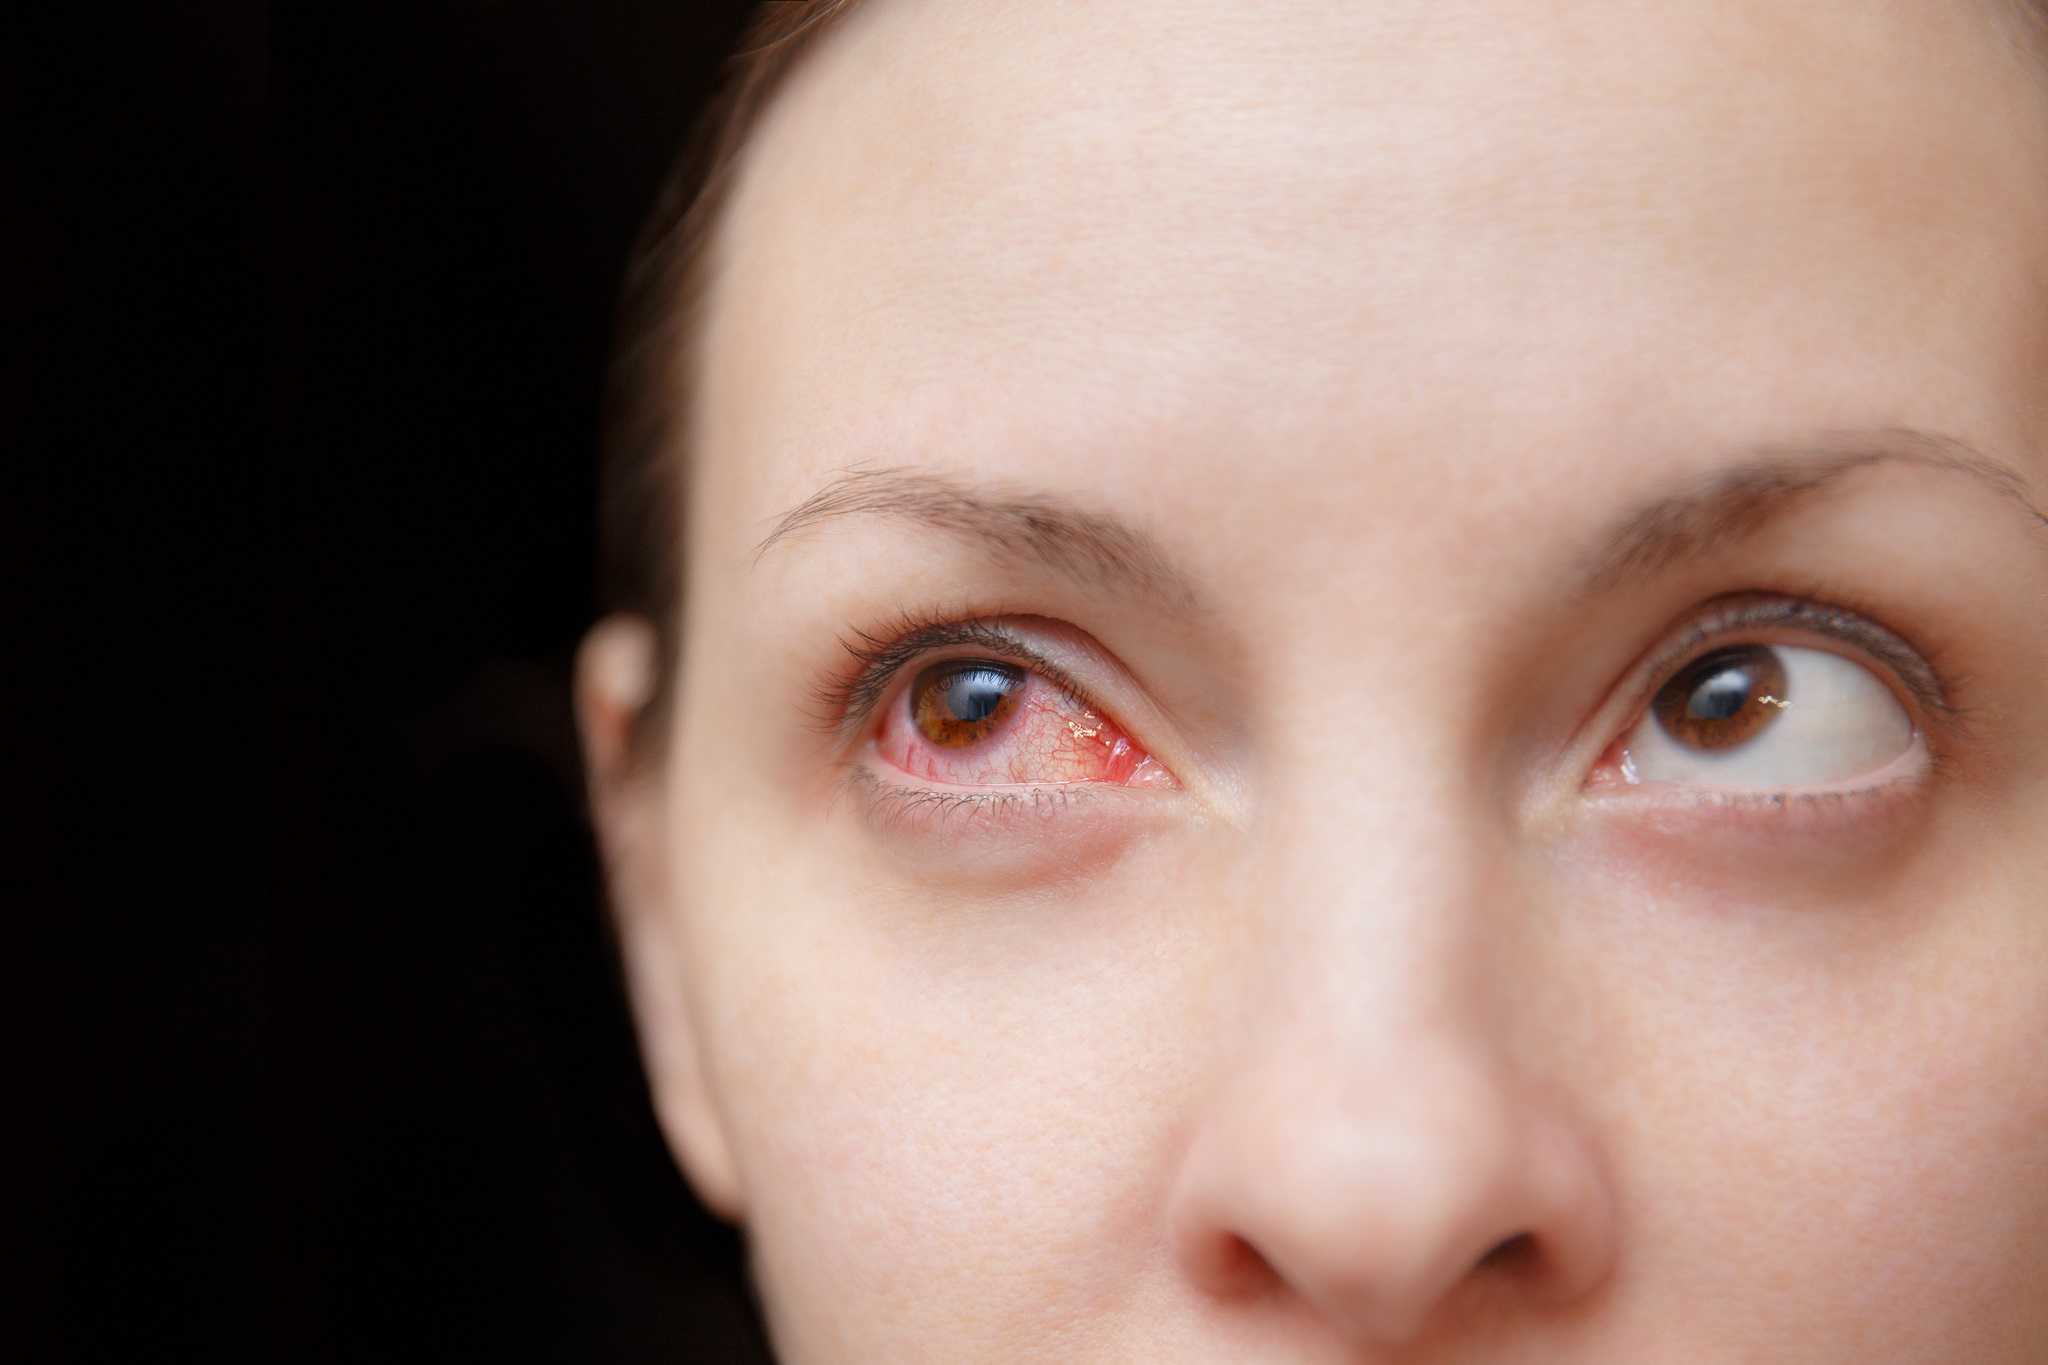 Woman with eye infection